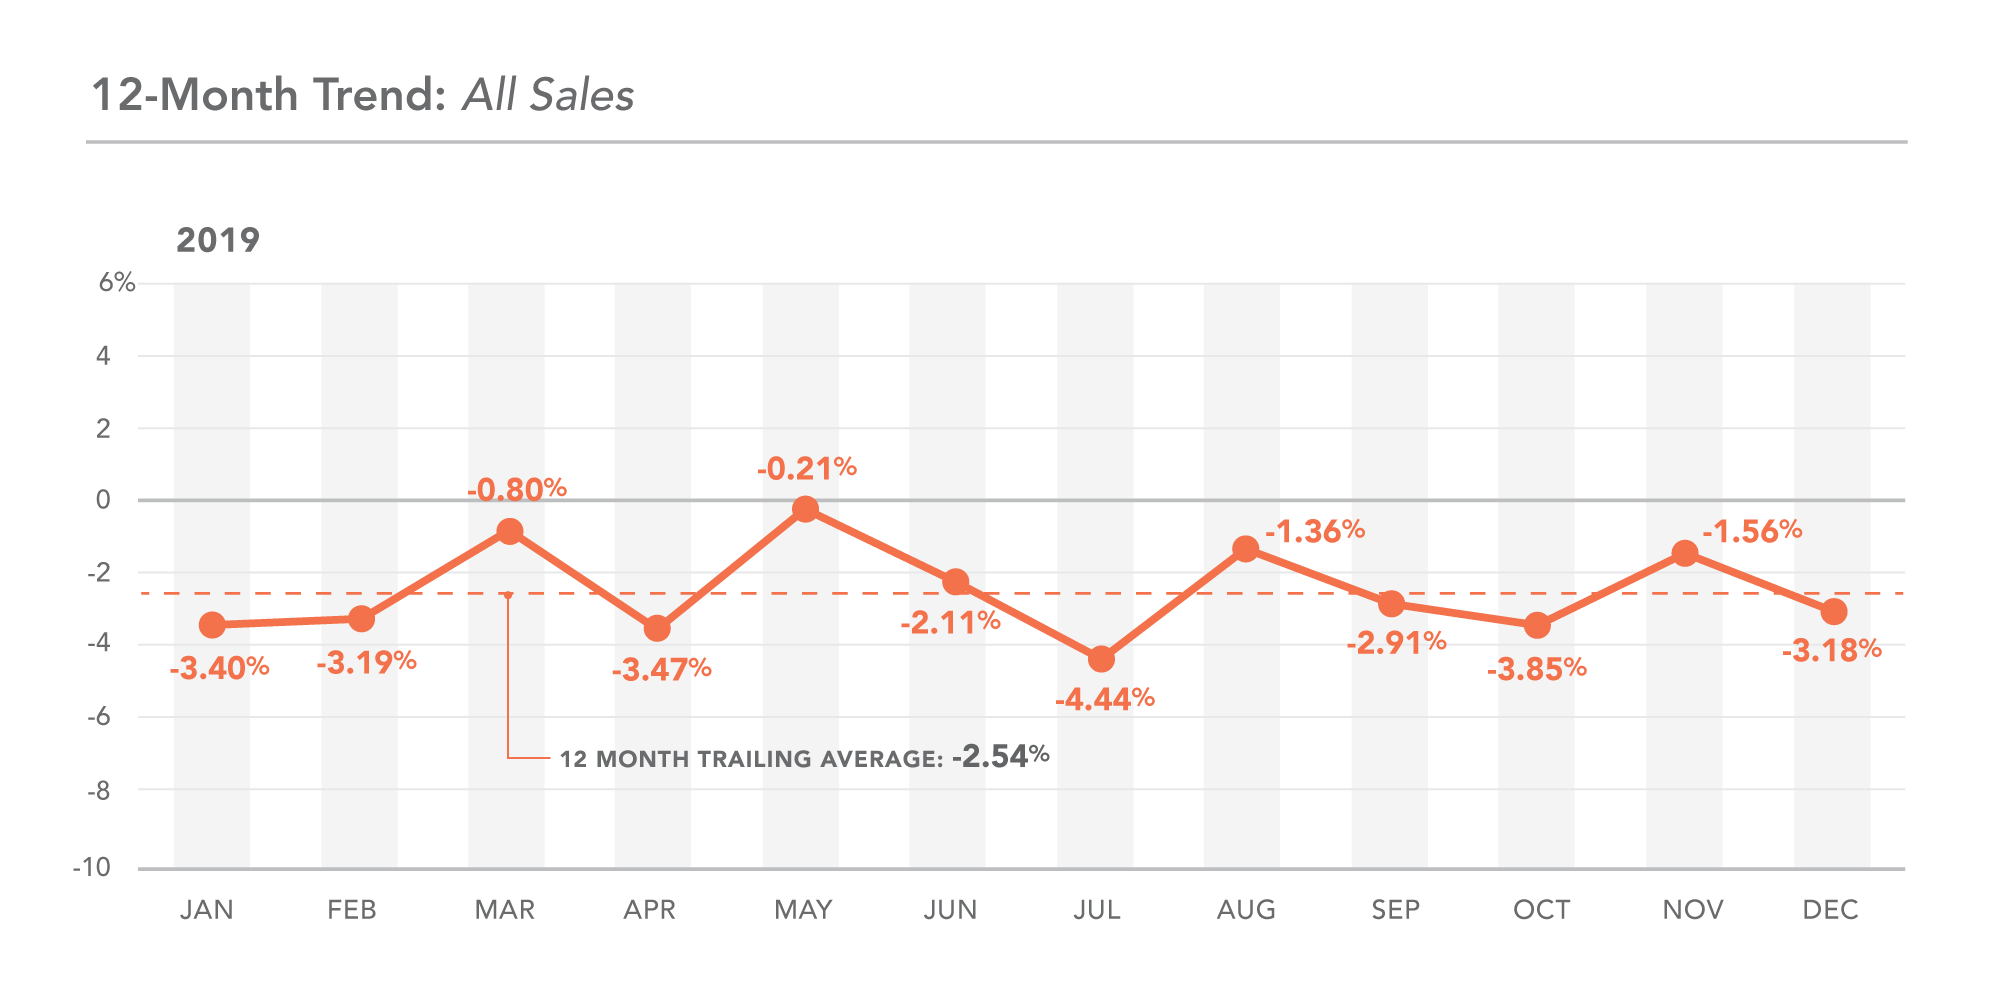 DC 12-month trend, all sales